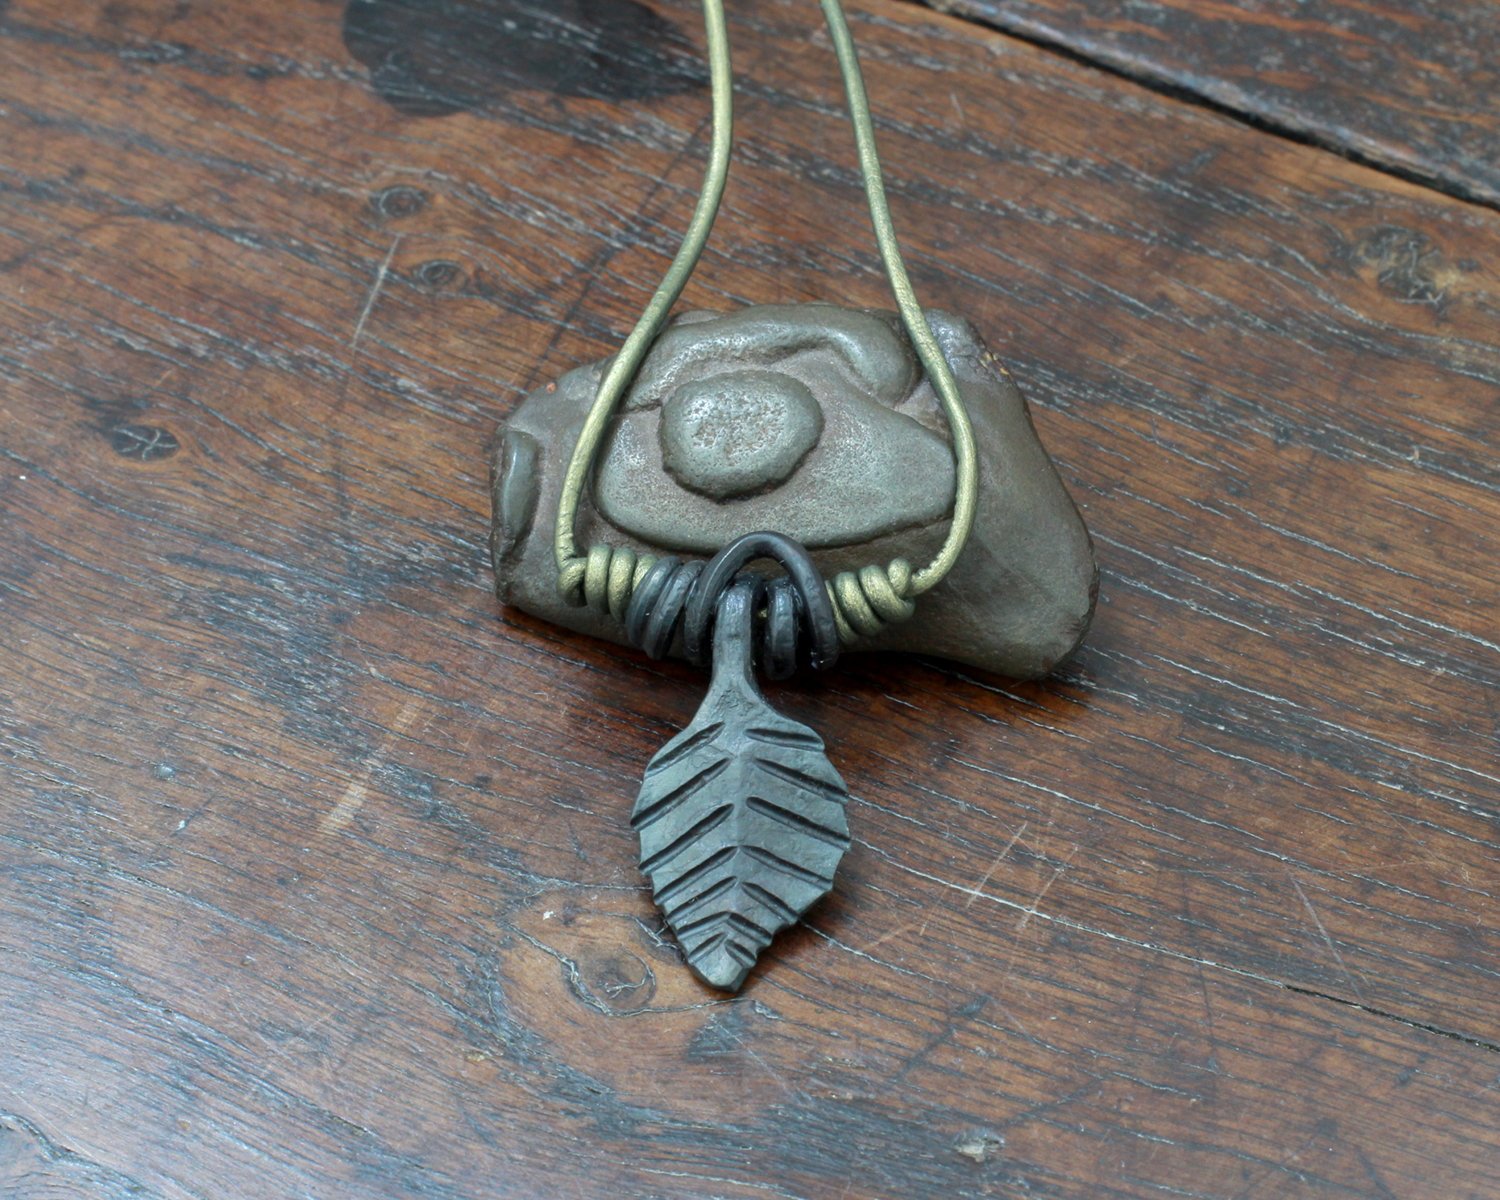 Medium forged iron leaf pendant on a green leather cord